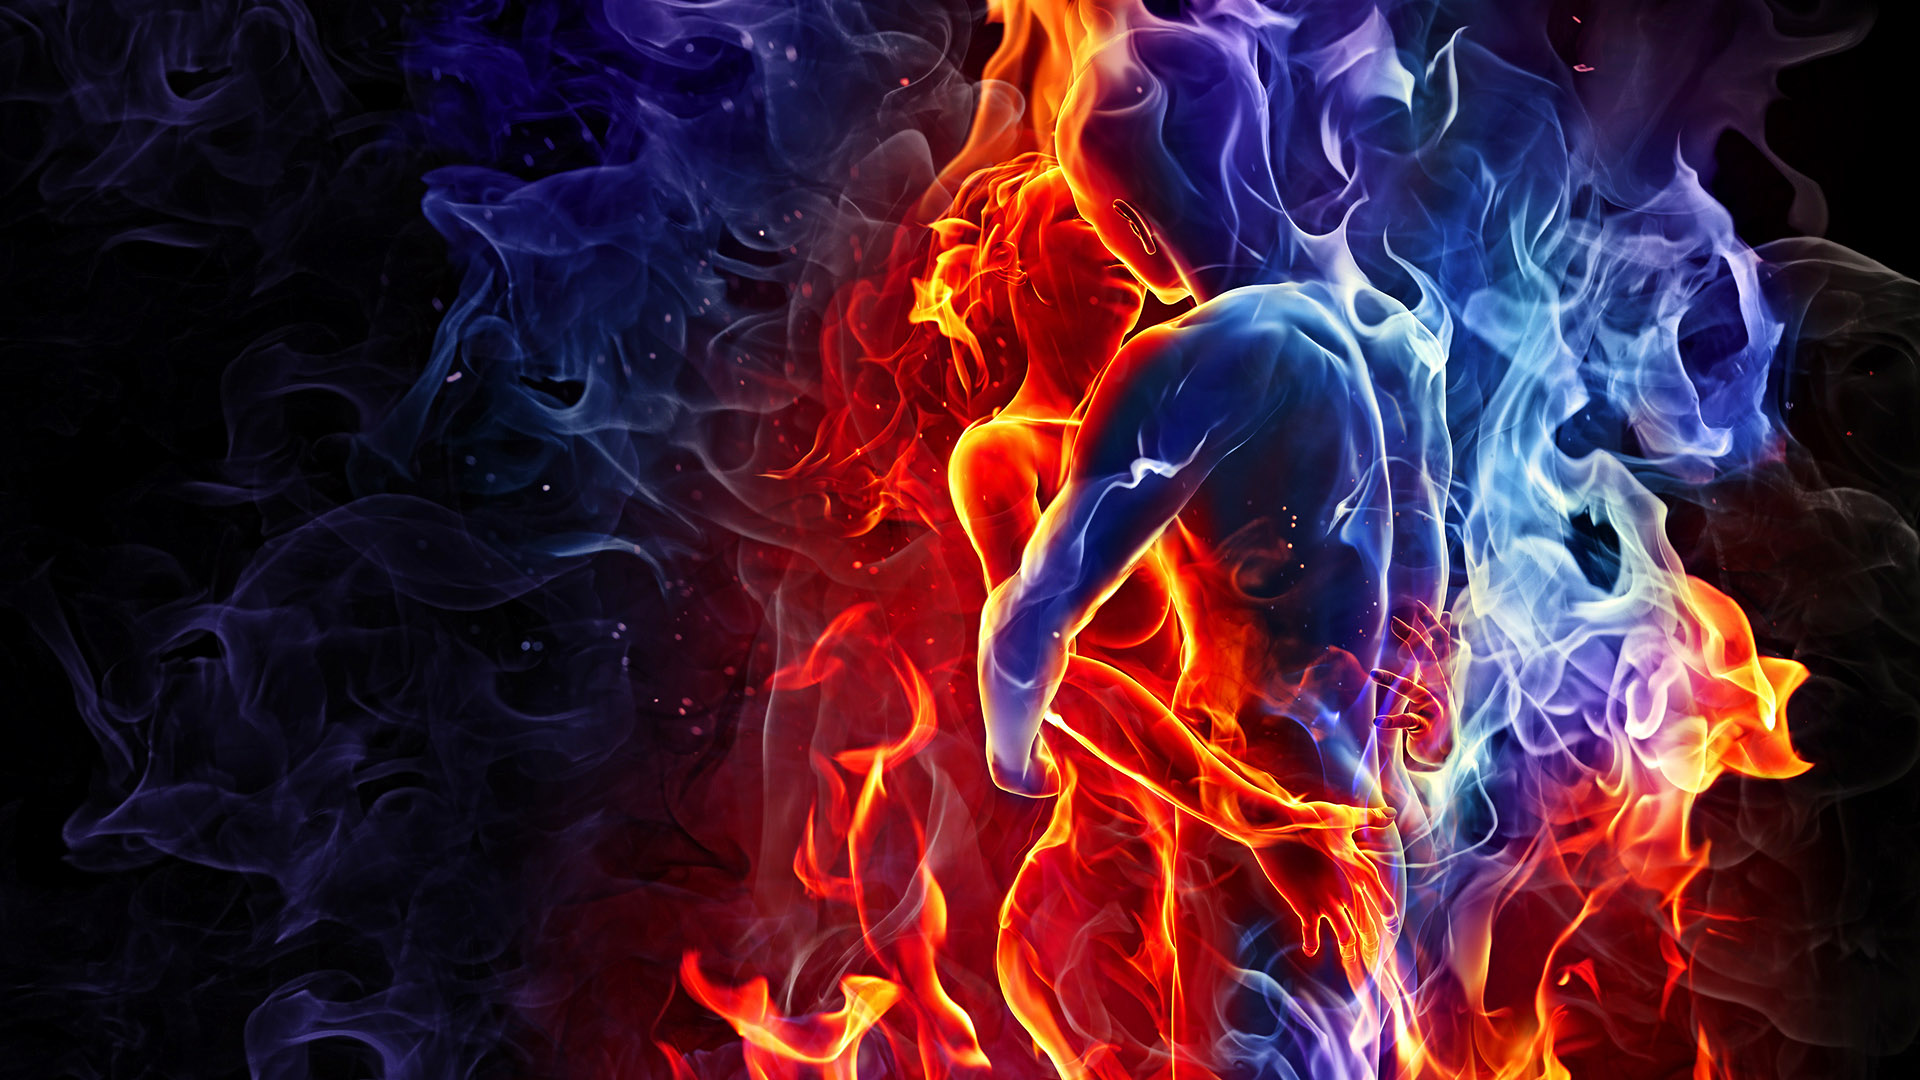 45 Cool Fire And Ice Wallpapers On Wallpapersafari